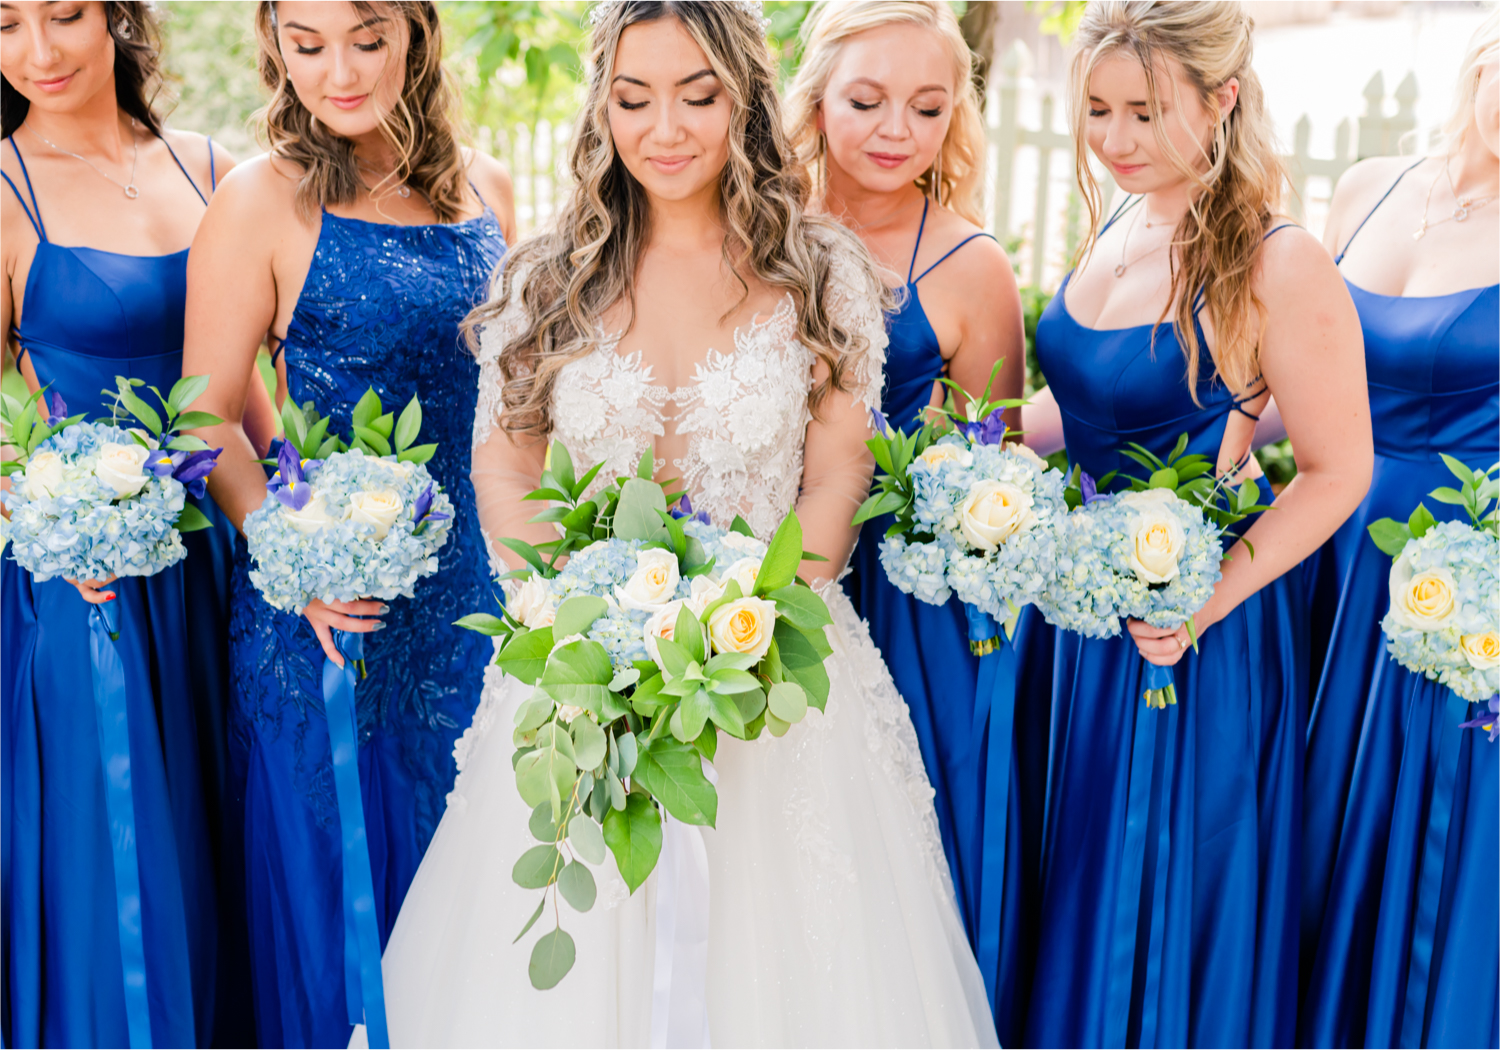 Romantic and Rustic Wedding at The Mill in Windsor | Britni Girard Photography | Colorado based wedding photography and videography team | Royal Blue and White Bridesmaids